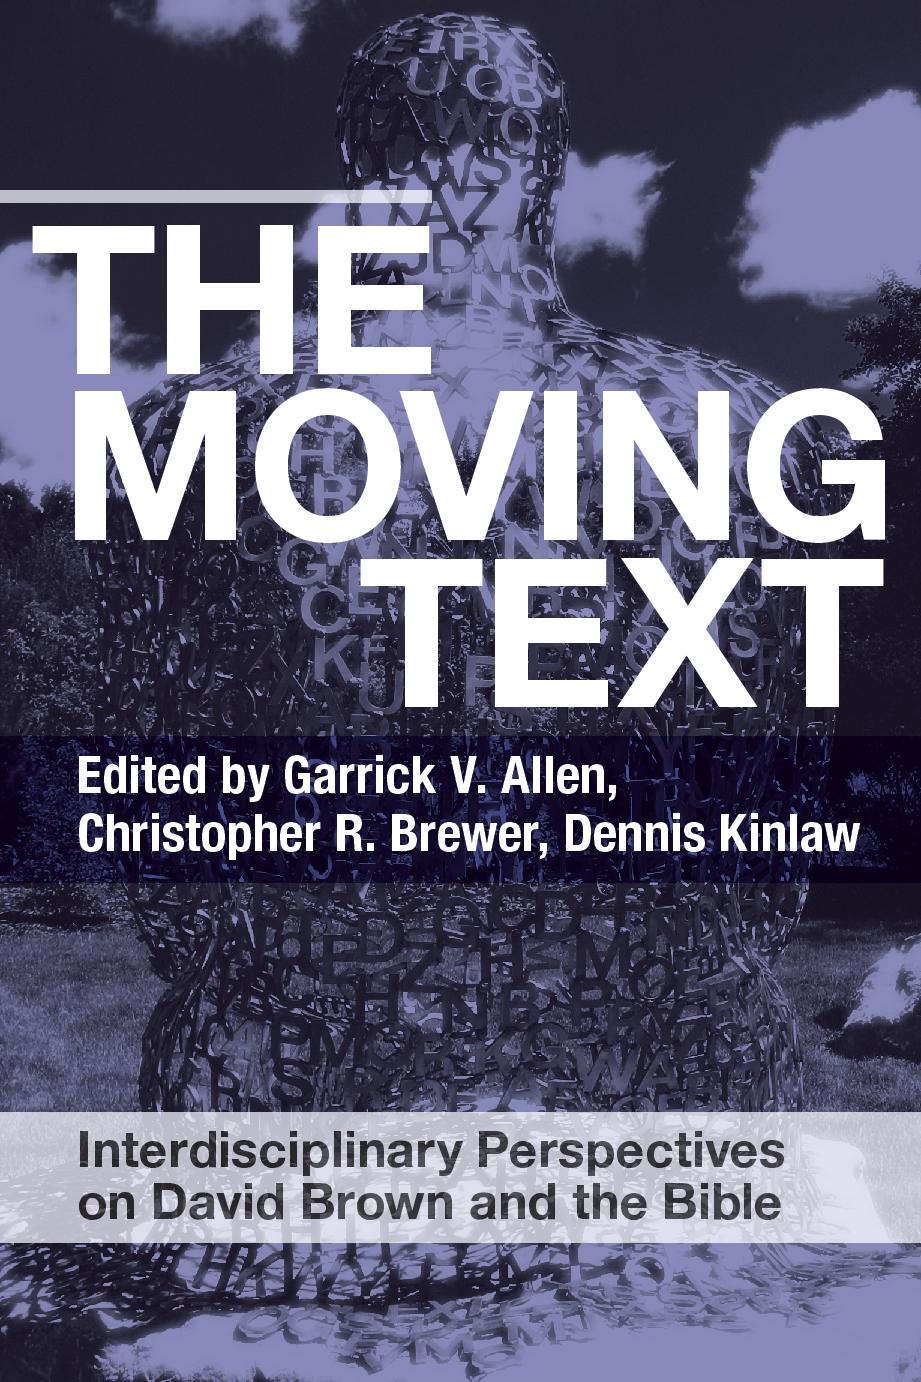 The Moving Text